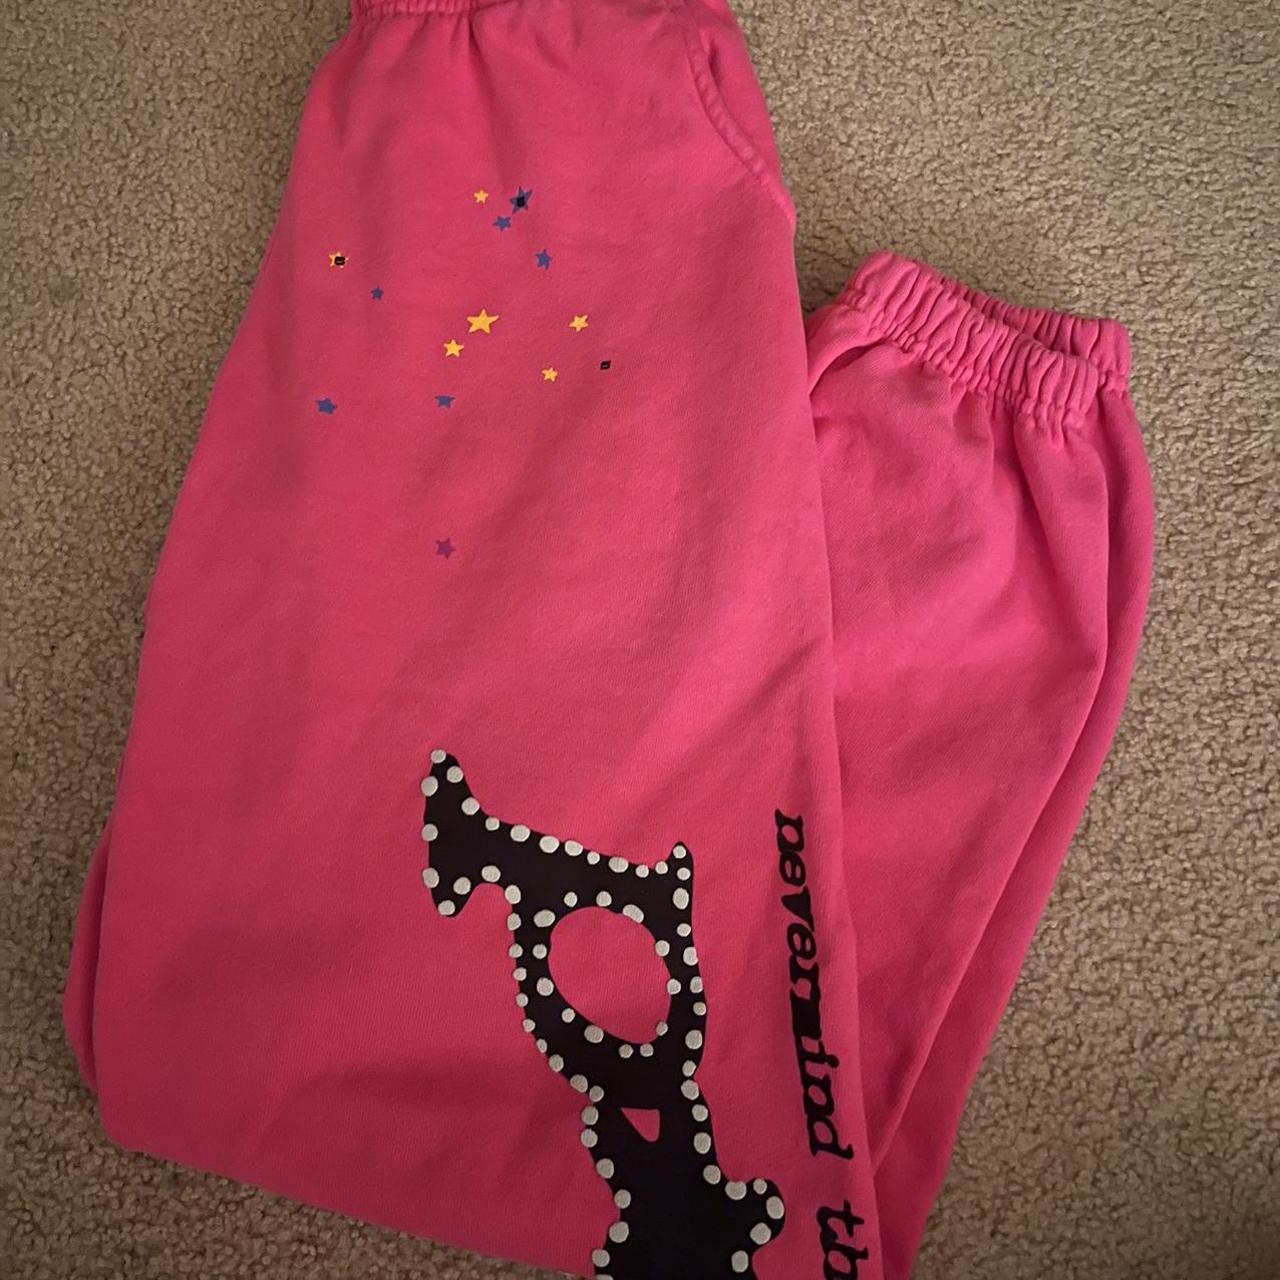 Sp5der PINK sweatpants Bought from another - Depop